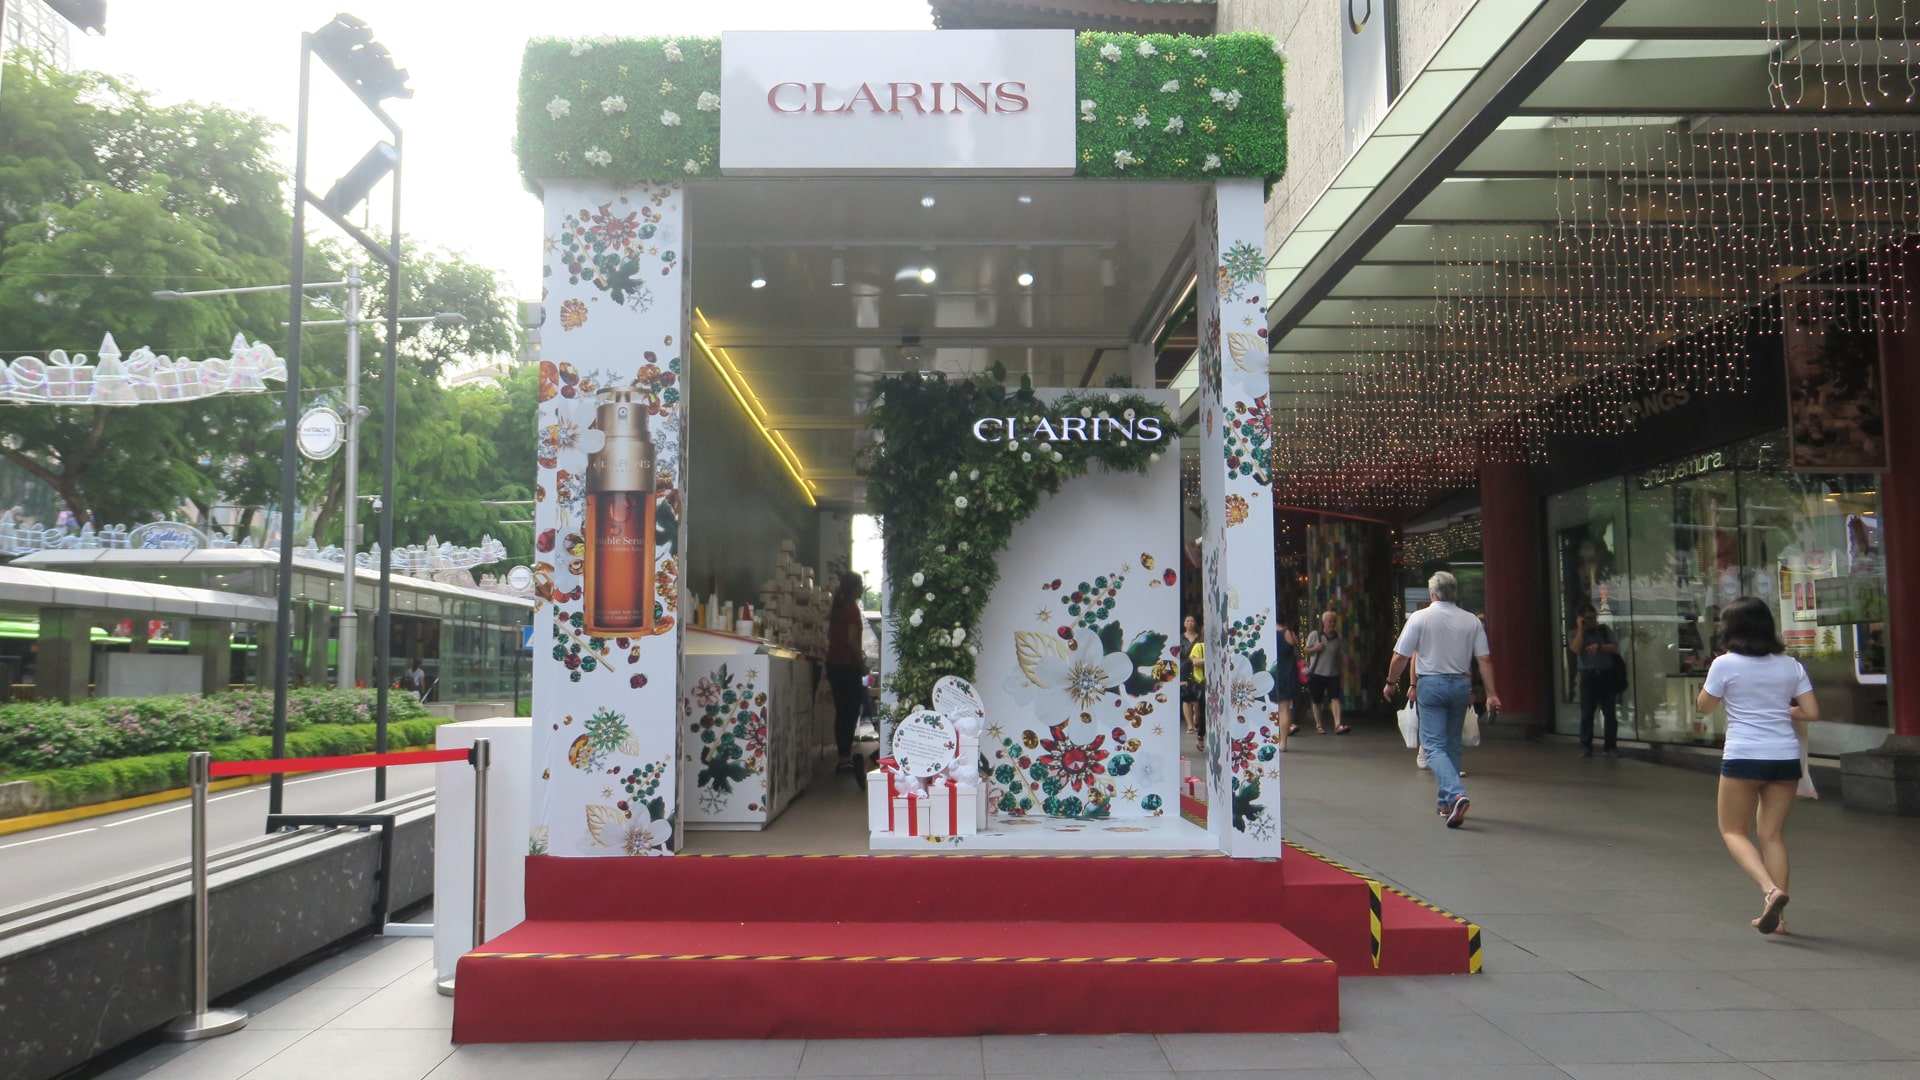 tsc_opt-images_tubelar-system_clarins-pop-up-beauty-store-1920x1080-01-min